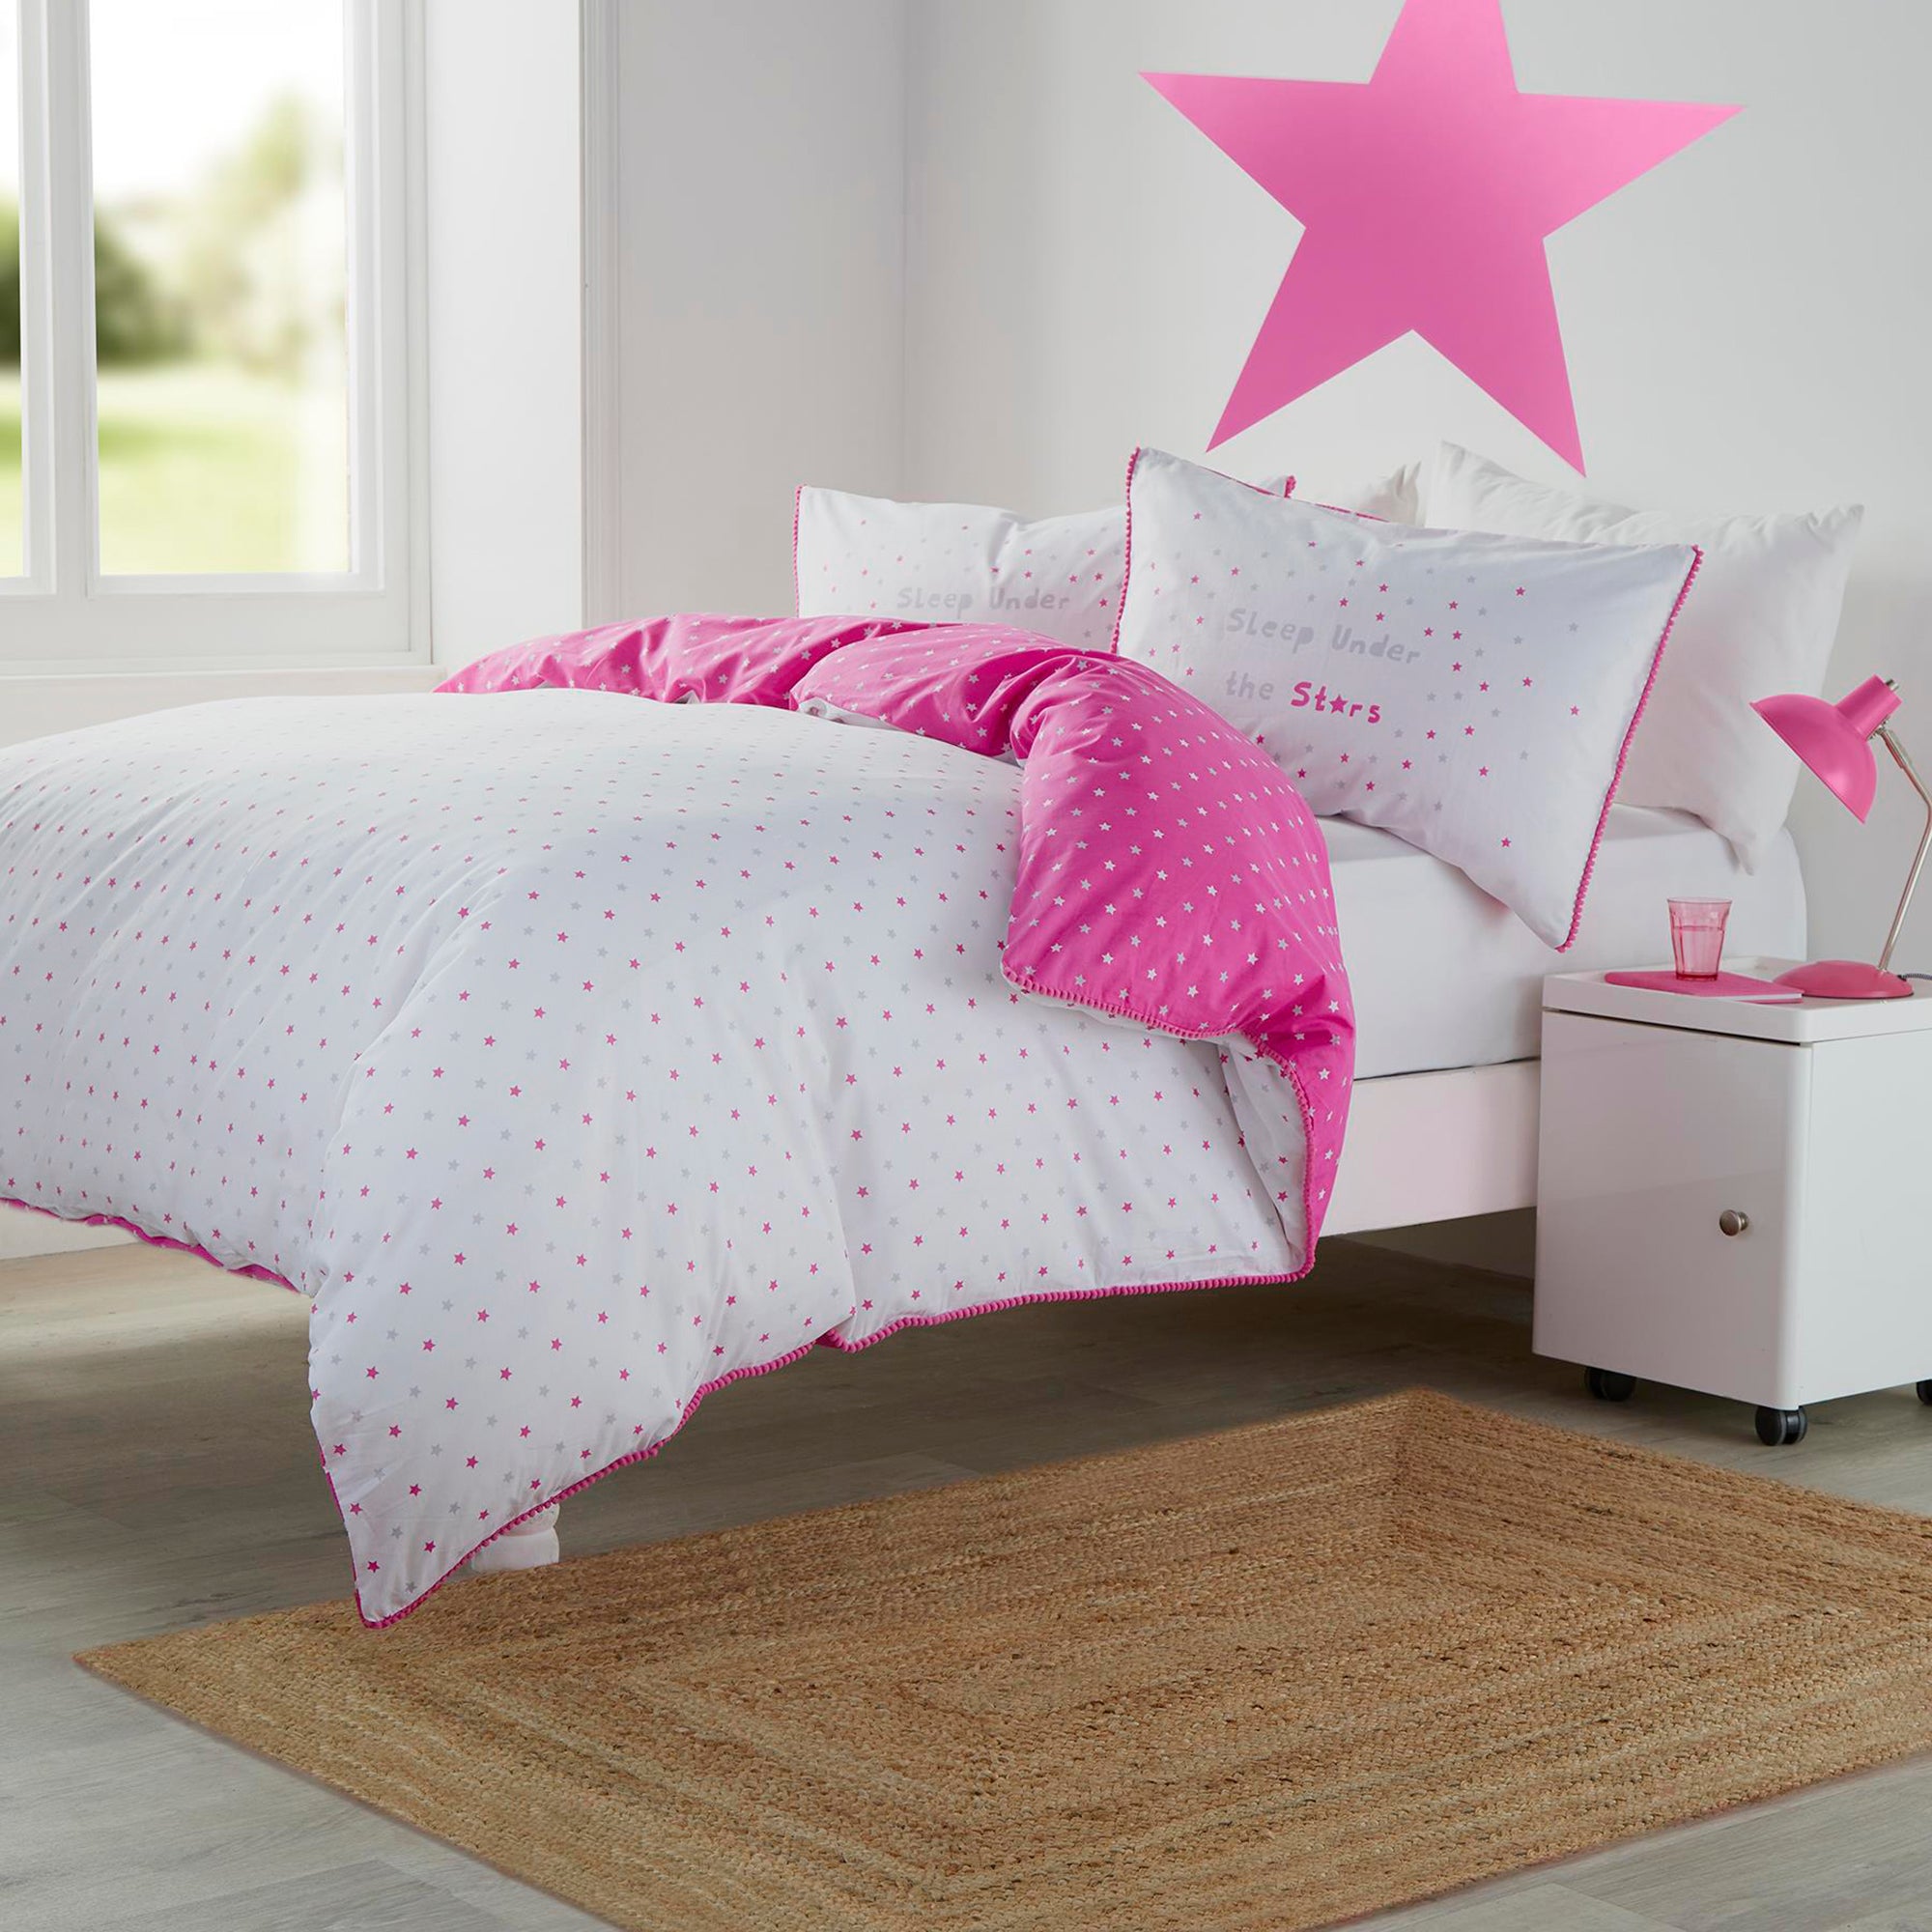 Mini Stars - 100% Cotton Duvet Cover Set in Pink - by Appletree Kids